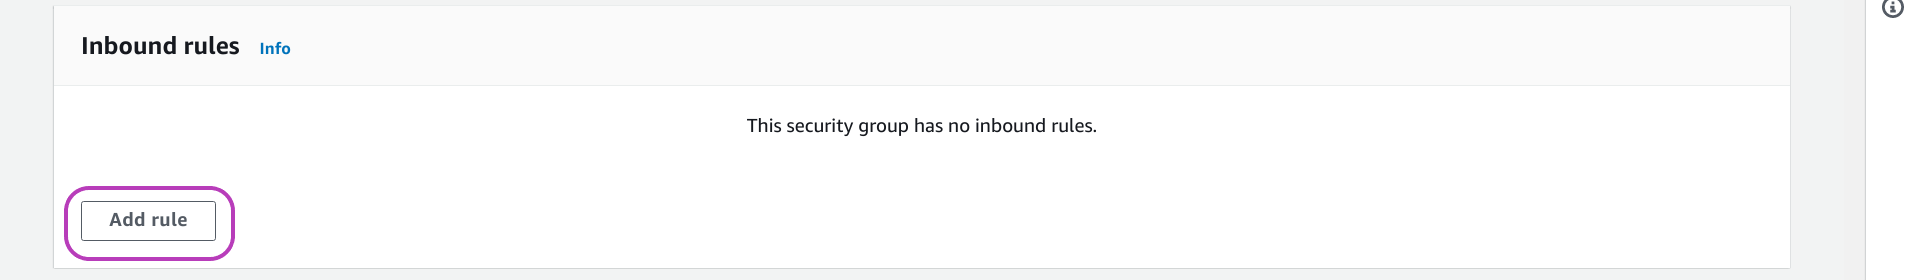 Screenshot of AWS Console "Create security group" page in a browser, scrolled down and showing the button "Add rule" circled.